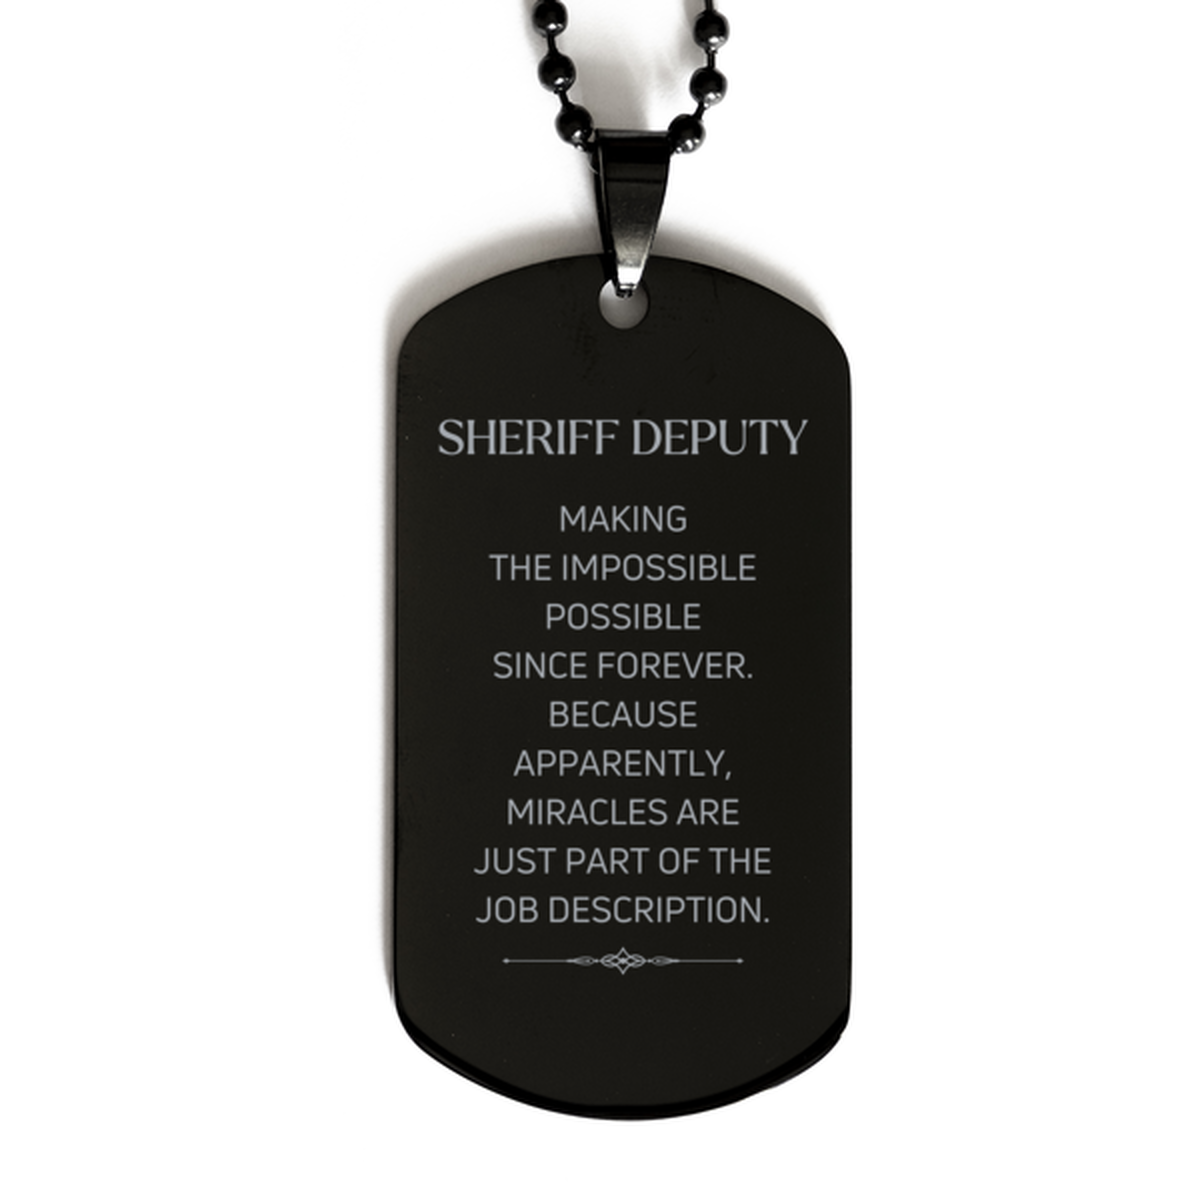 Funny Sheriff Deputy Gifts, Miracles are just part of the job description, Inspirational Birthday Black Dog Tag For Sheriff Deputy, Men, Women, Coworkers, Friends, Boss